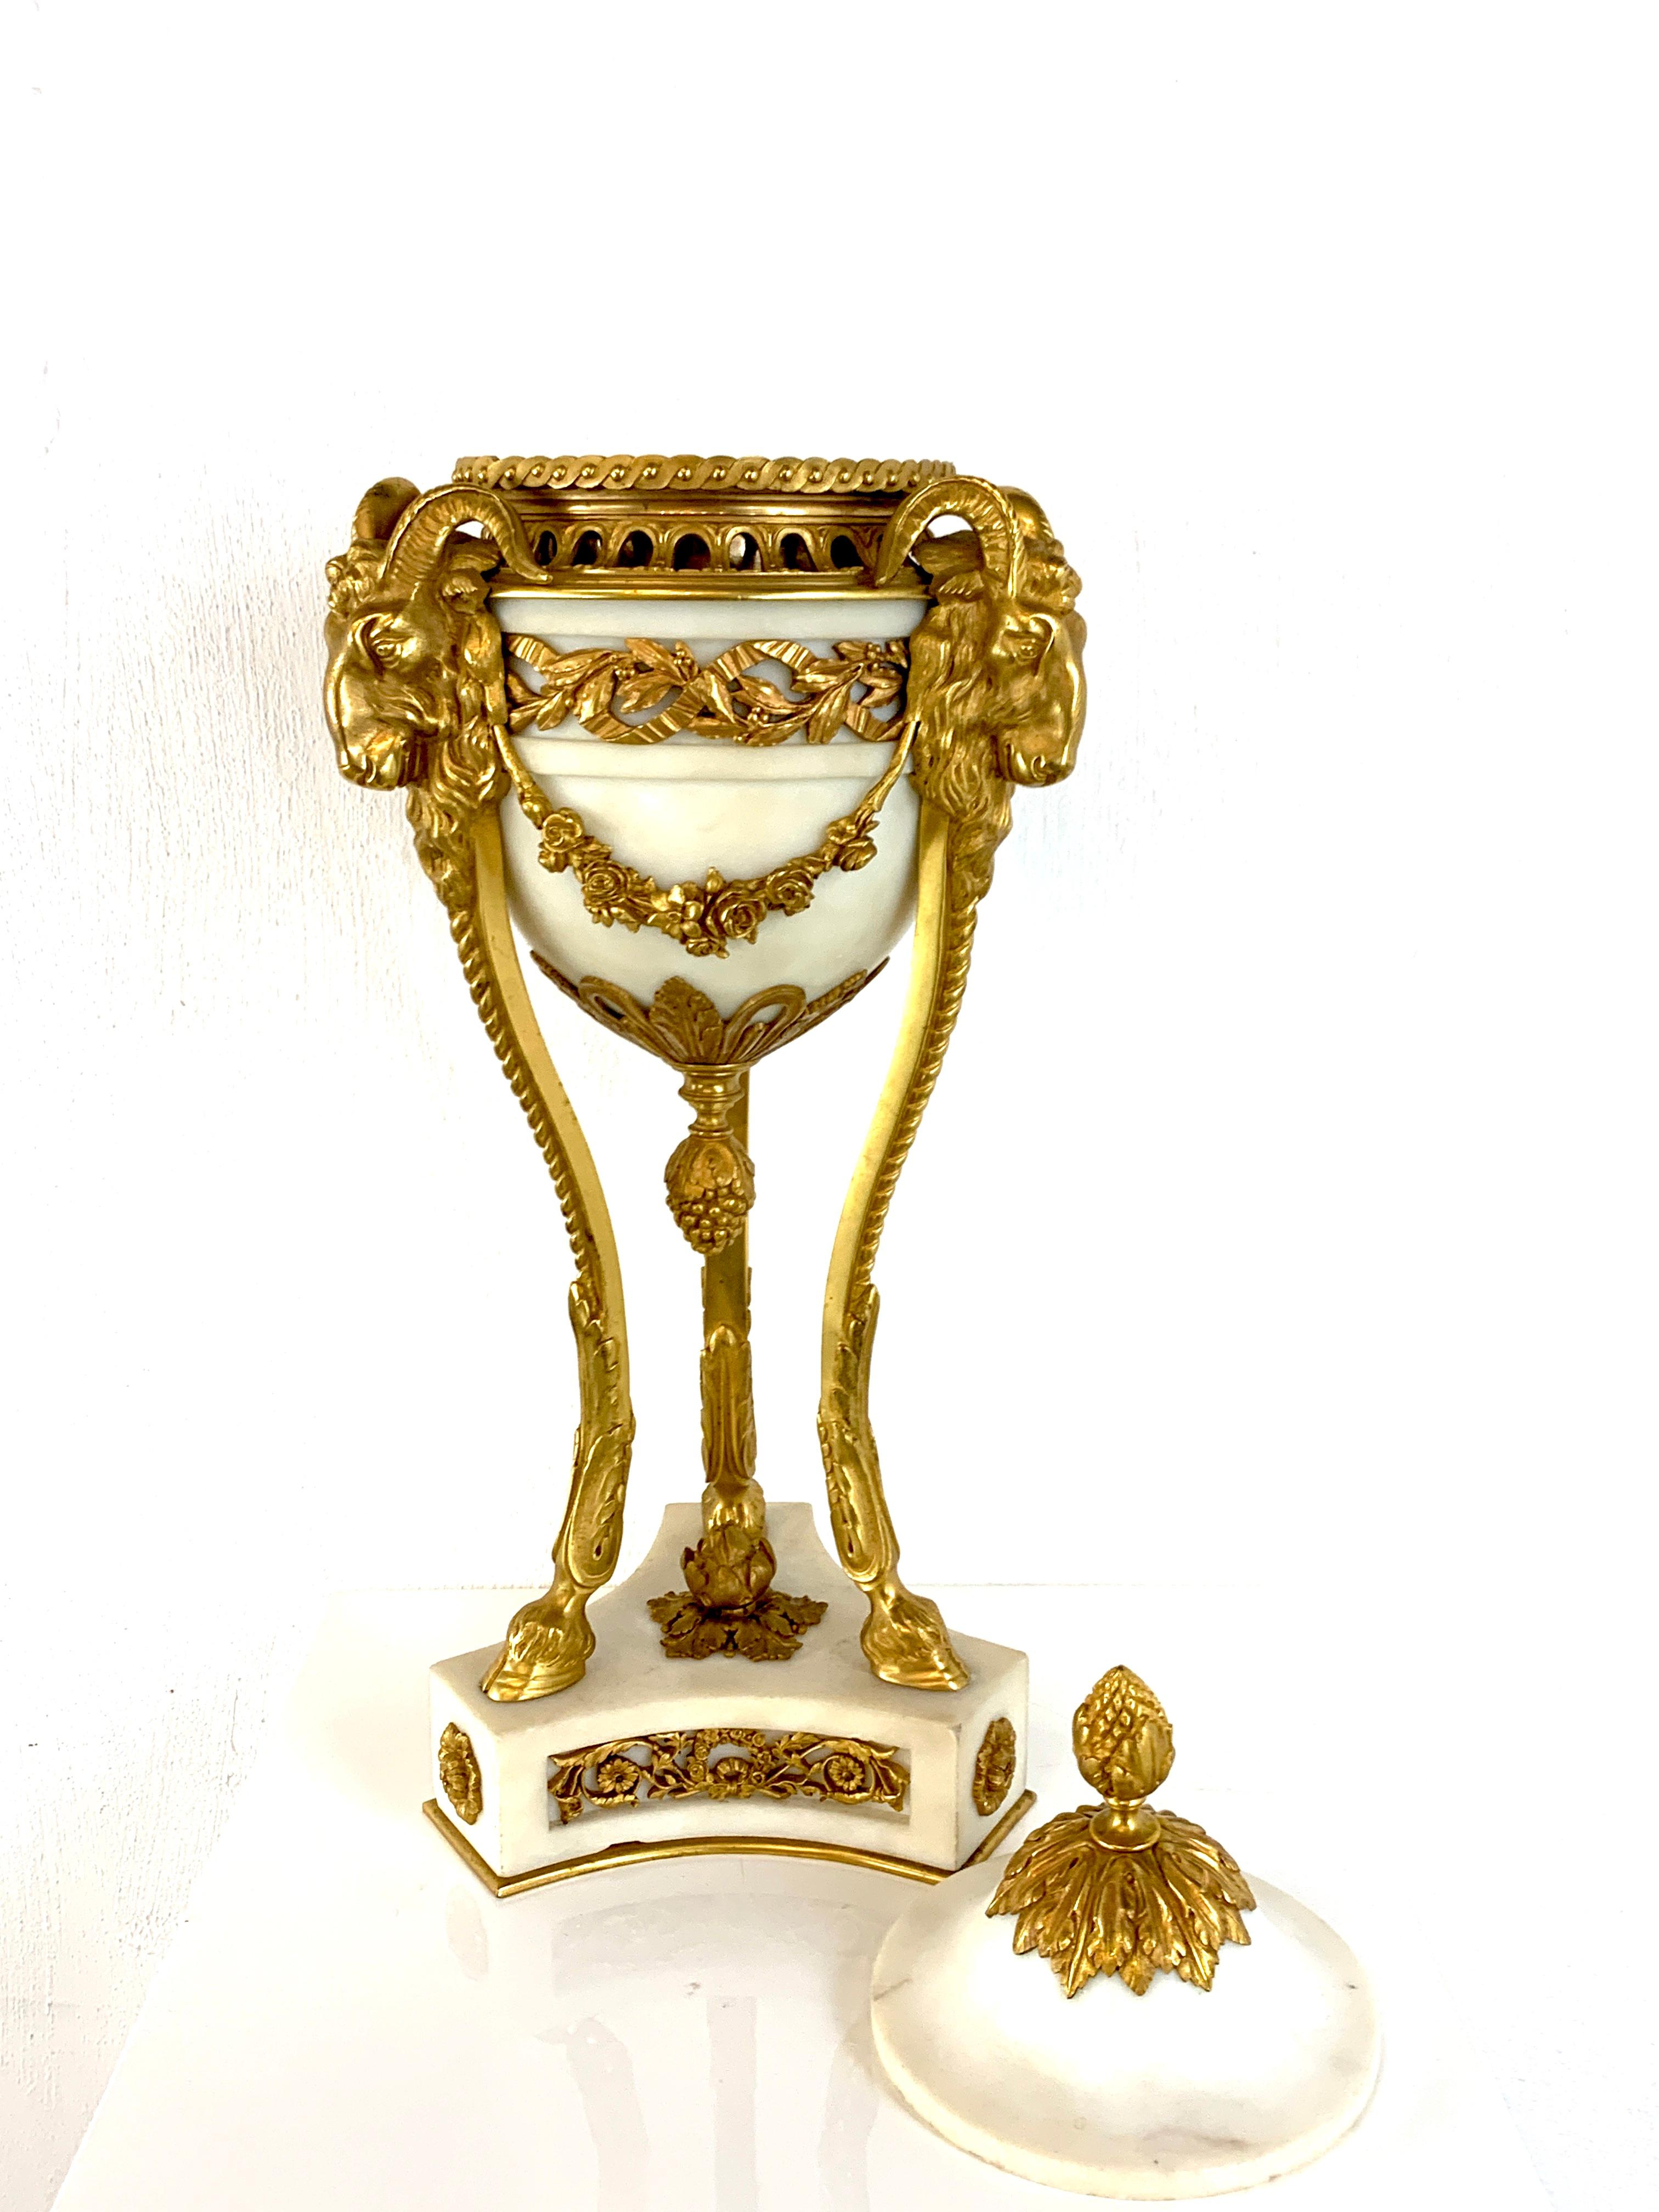 Single Louis XVI Style Ormolu and Marble Neoclassical Cassolette/Urn For Sale 4